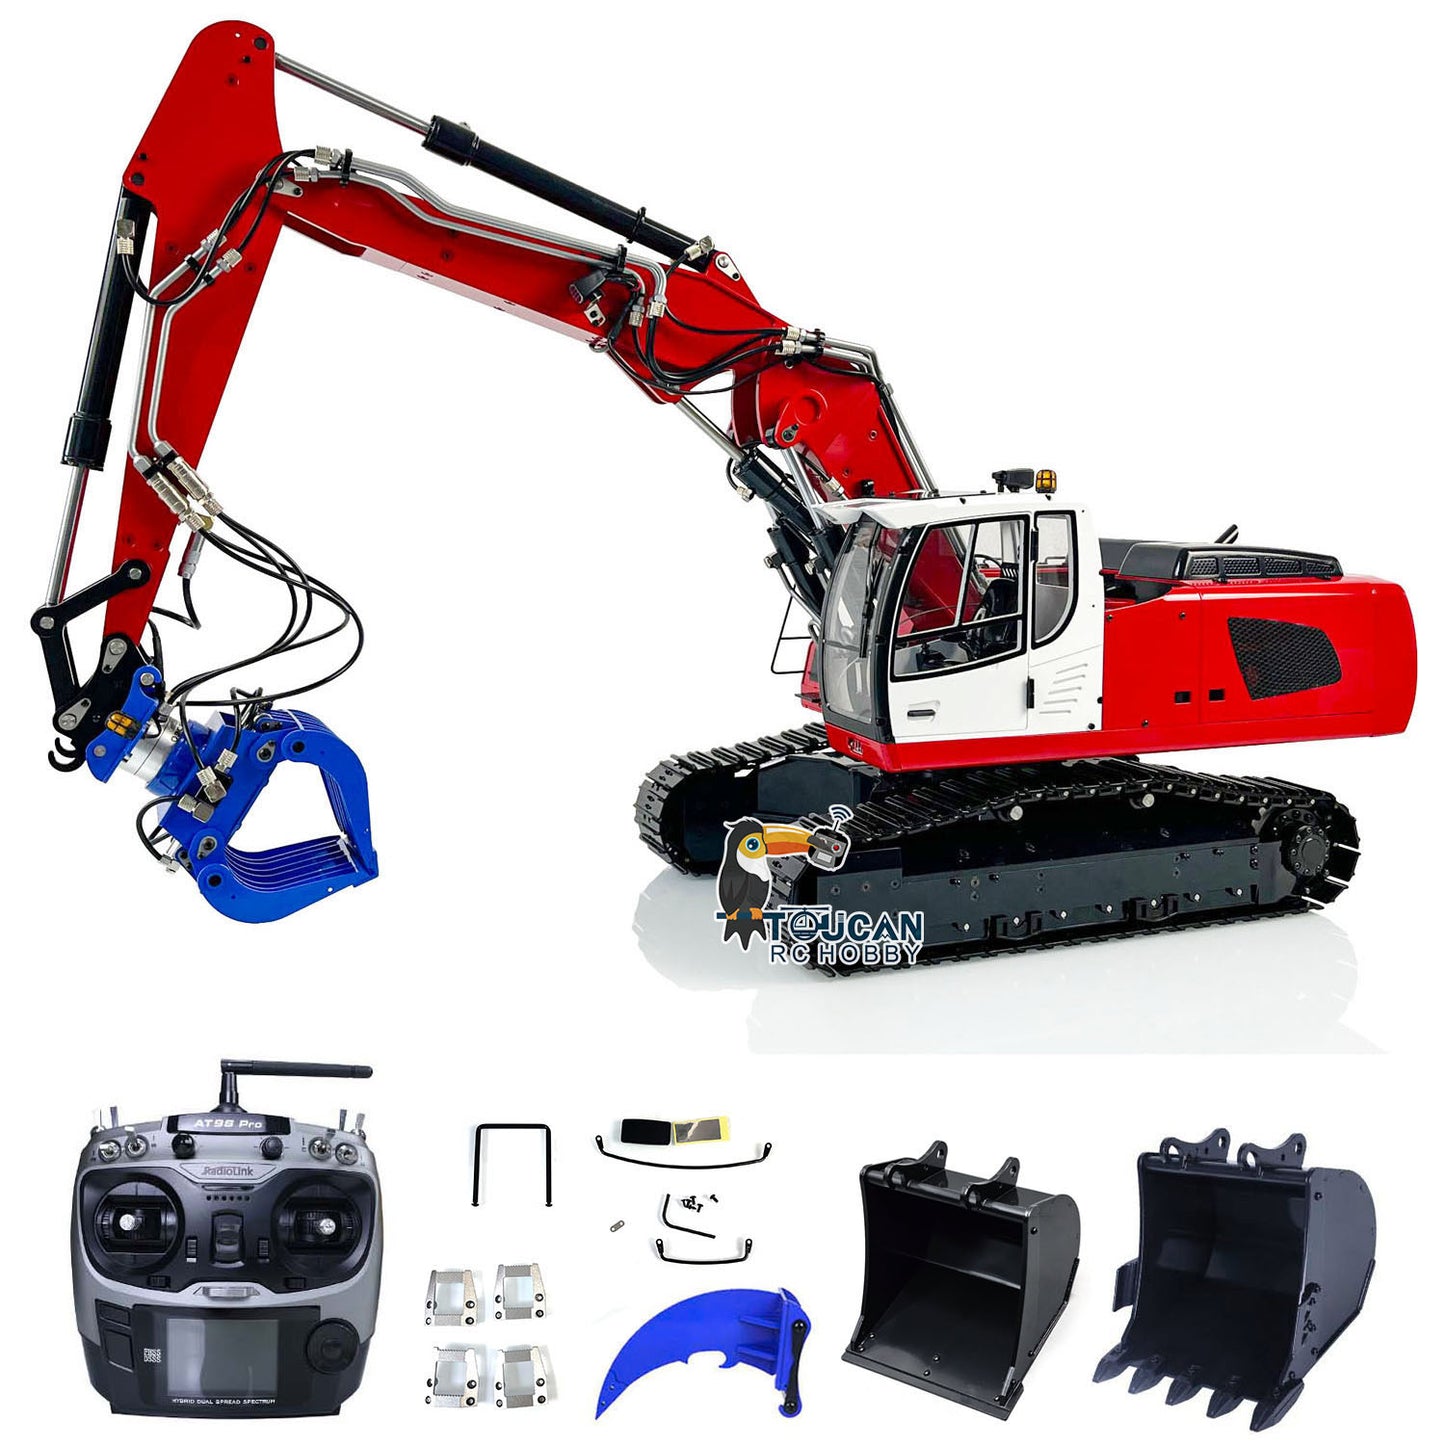 IN STOCK MTM 1/14 946-3 10CH RC Tracked Hydraulic Excavator 3 Arms Metal Diggers Assembled Painted Model Ripper Grab Bucket Toy ESC